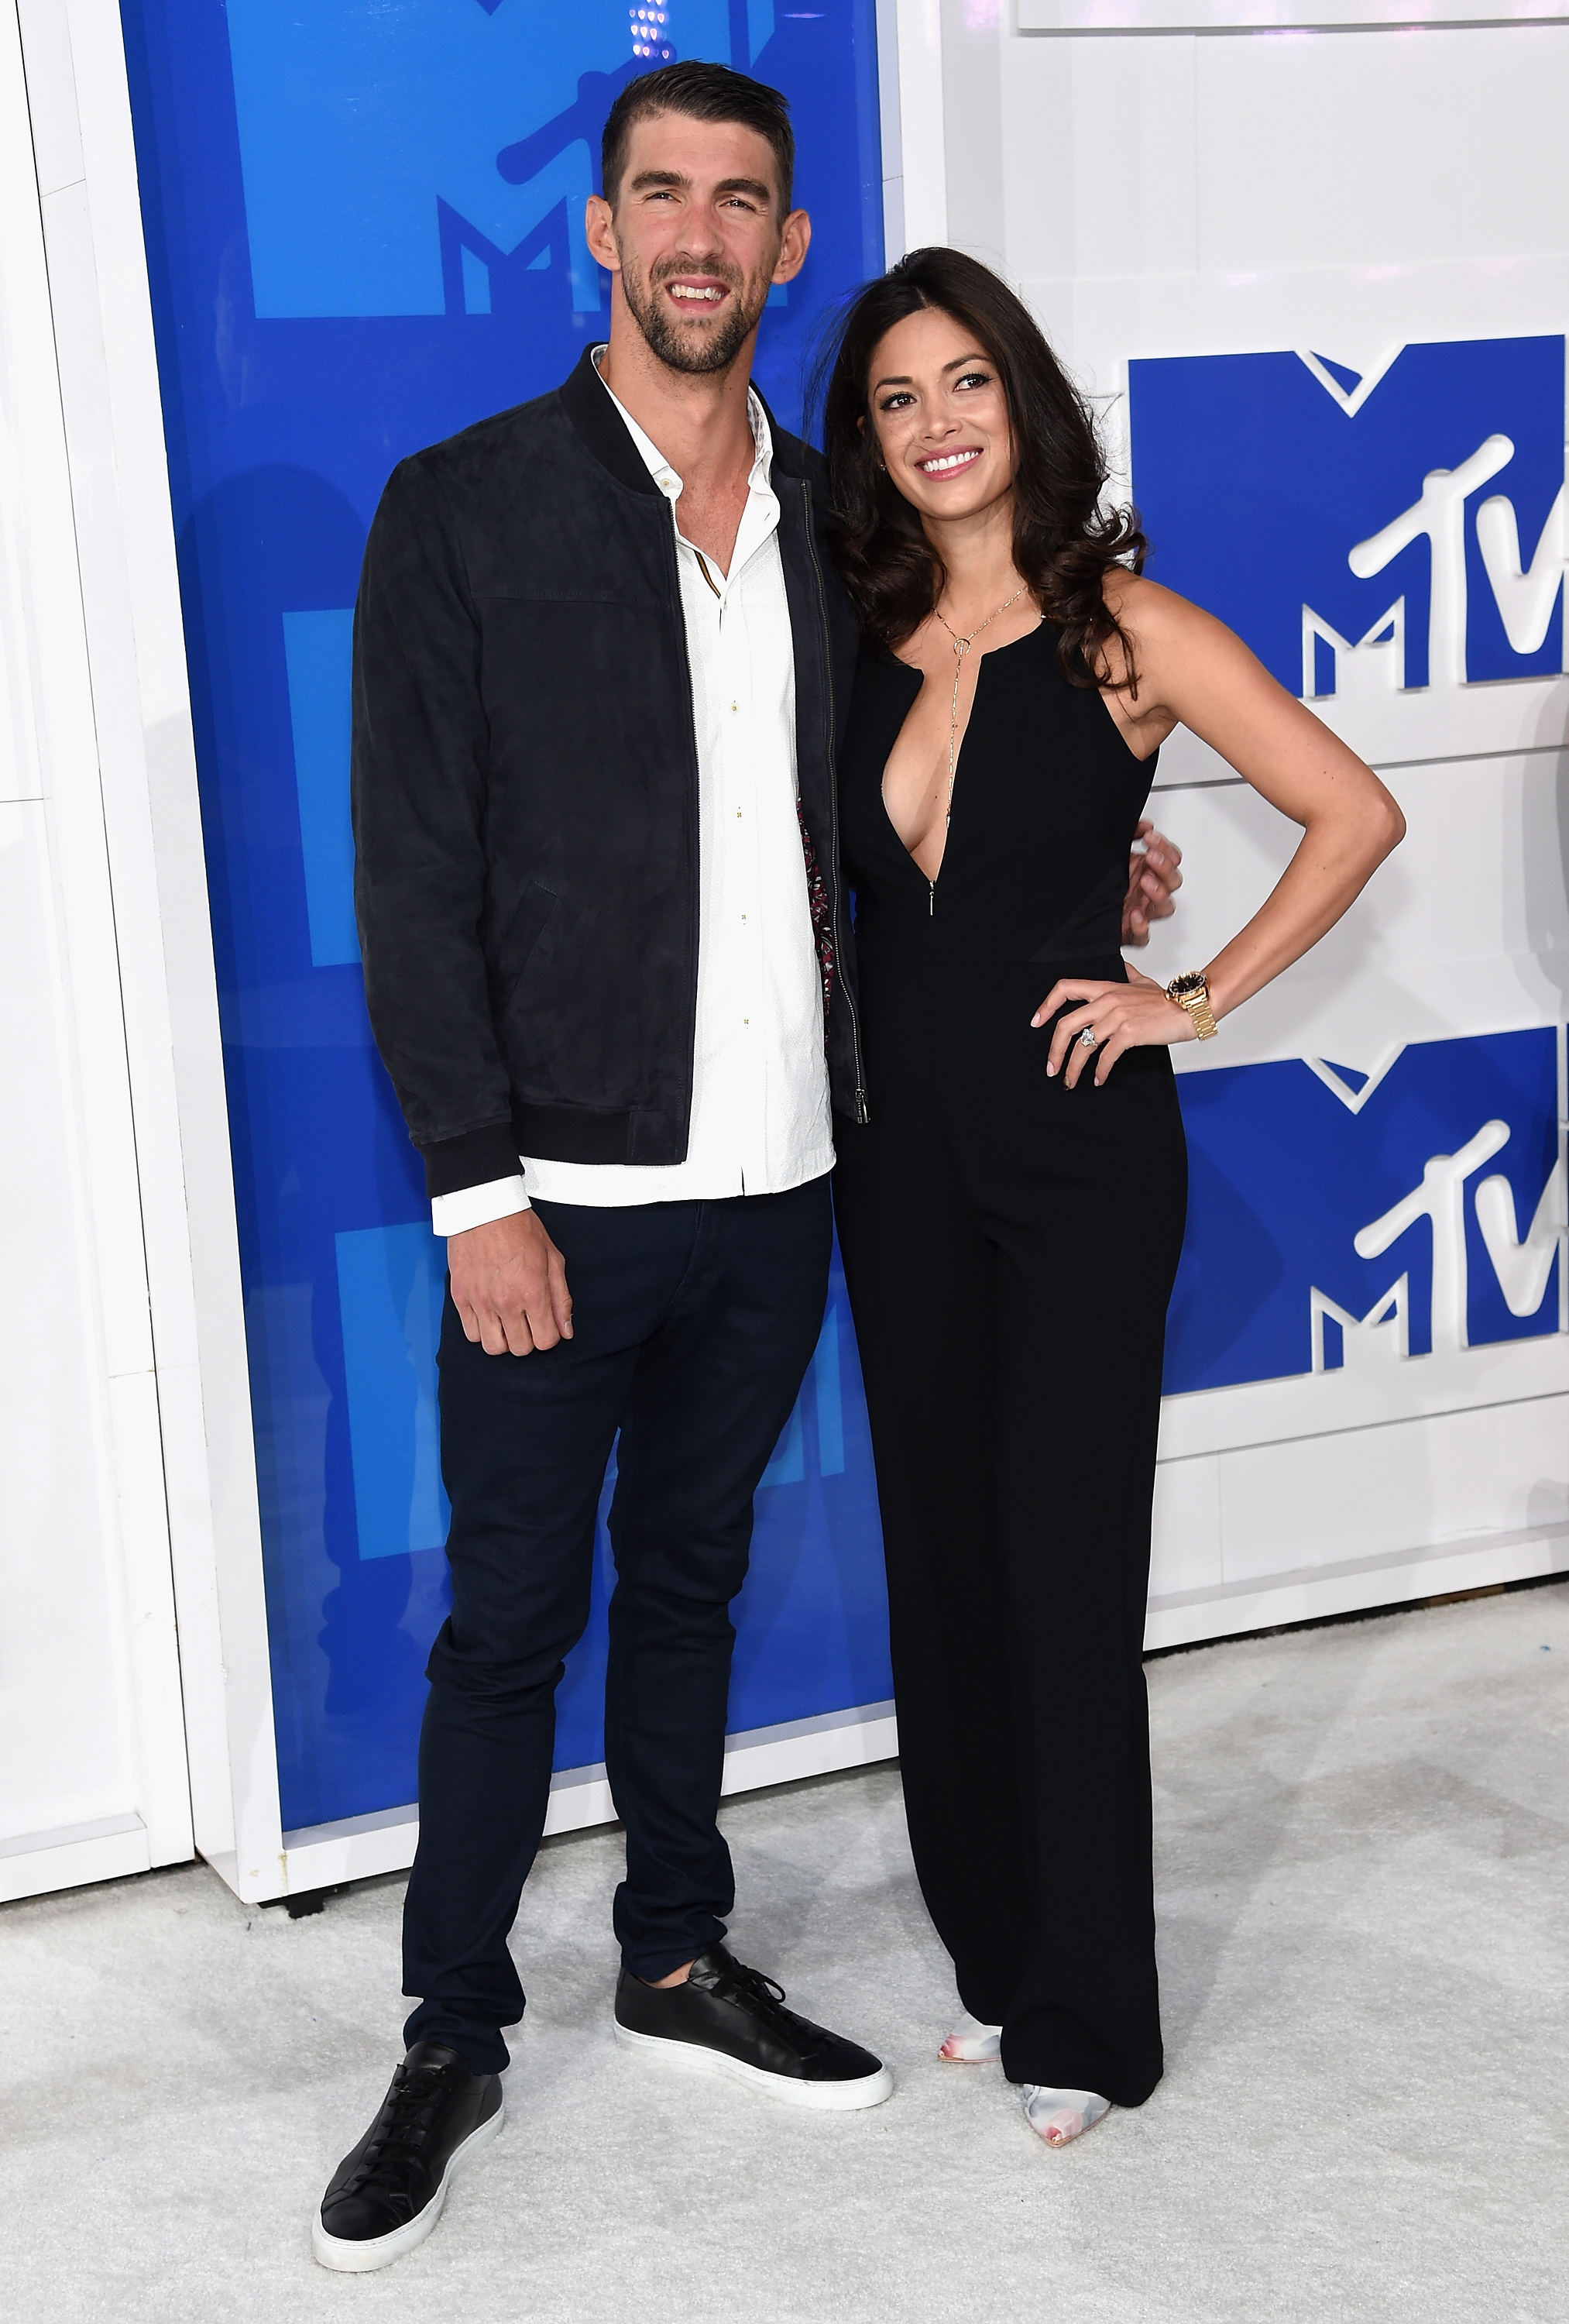 Michael Phelps and Nicole Johnson attend the 2016 MTV Video Music Awards at Madison Square Garden on Aug. 28, 2016 in New York City.